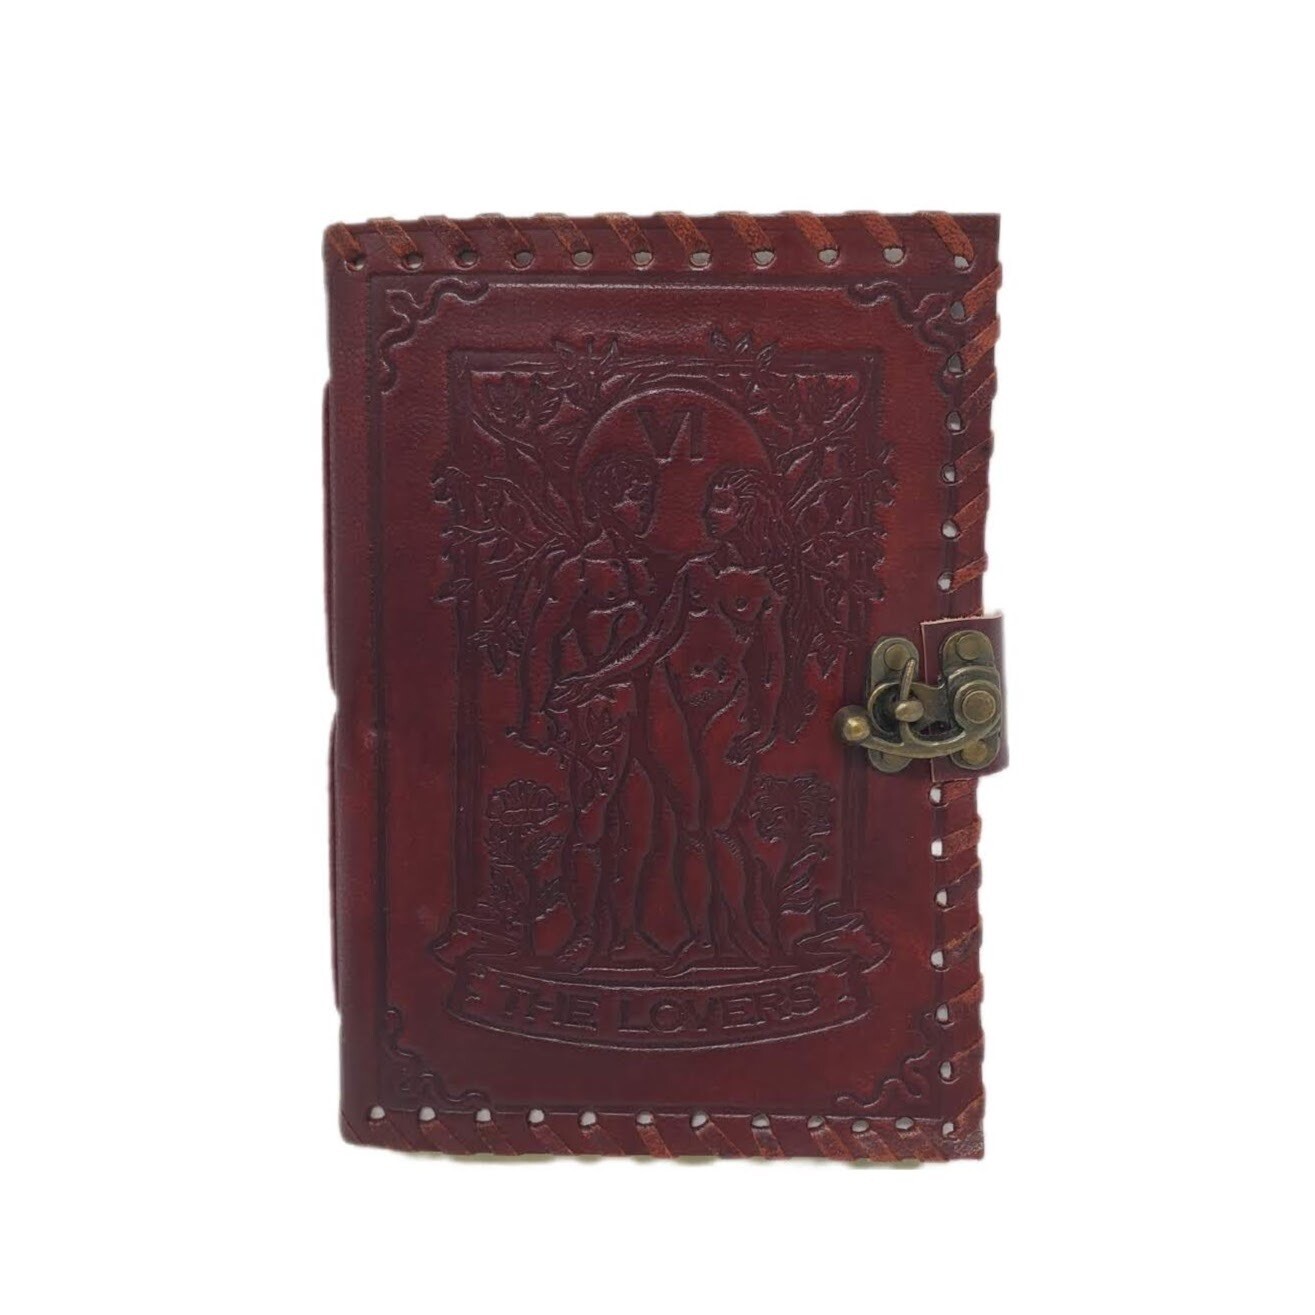 THE LOVERS TAROT LEATHER JOURNAL 5"x7"